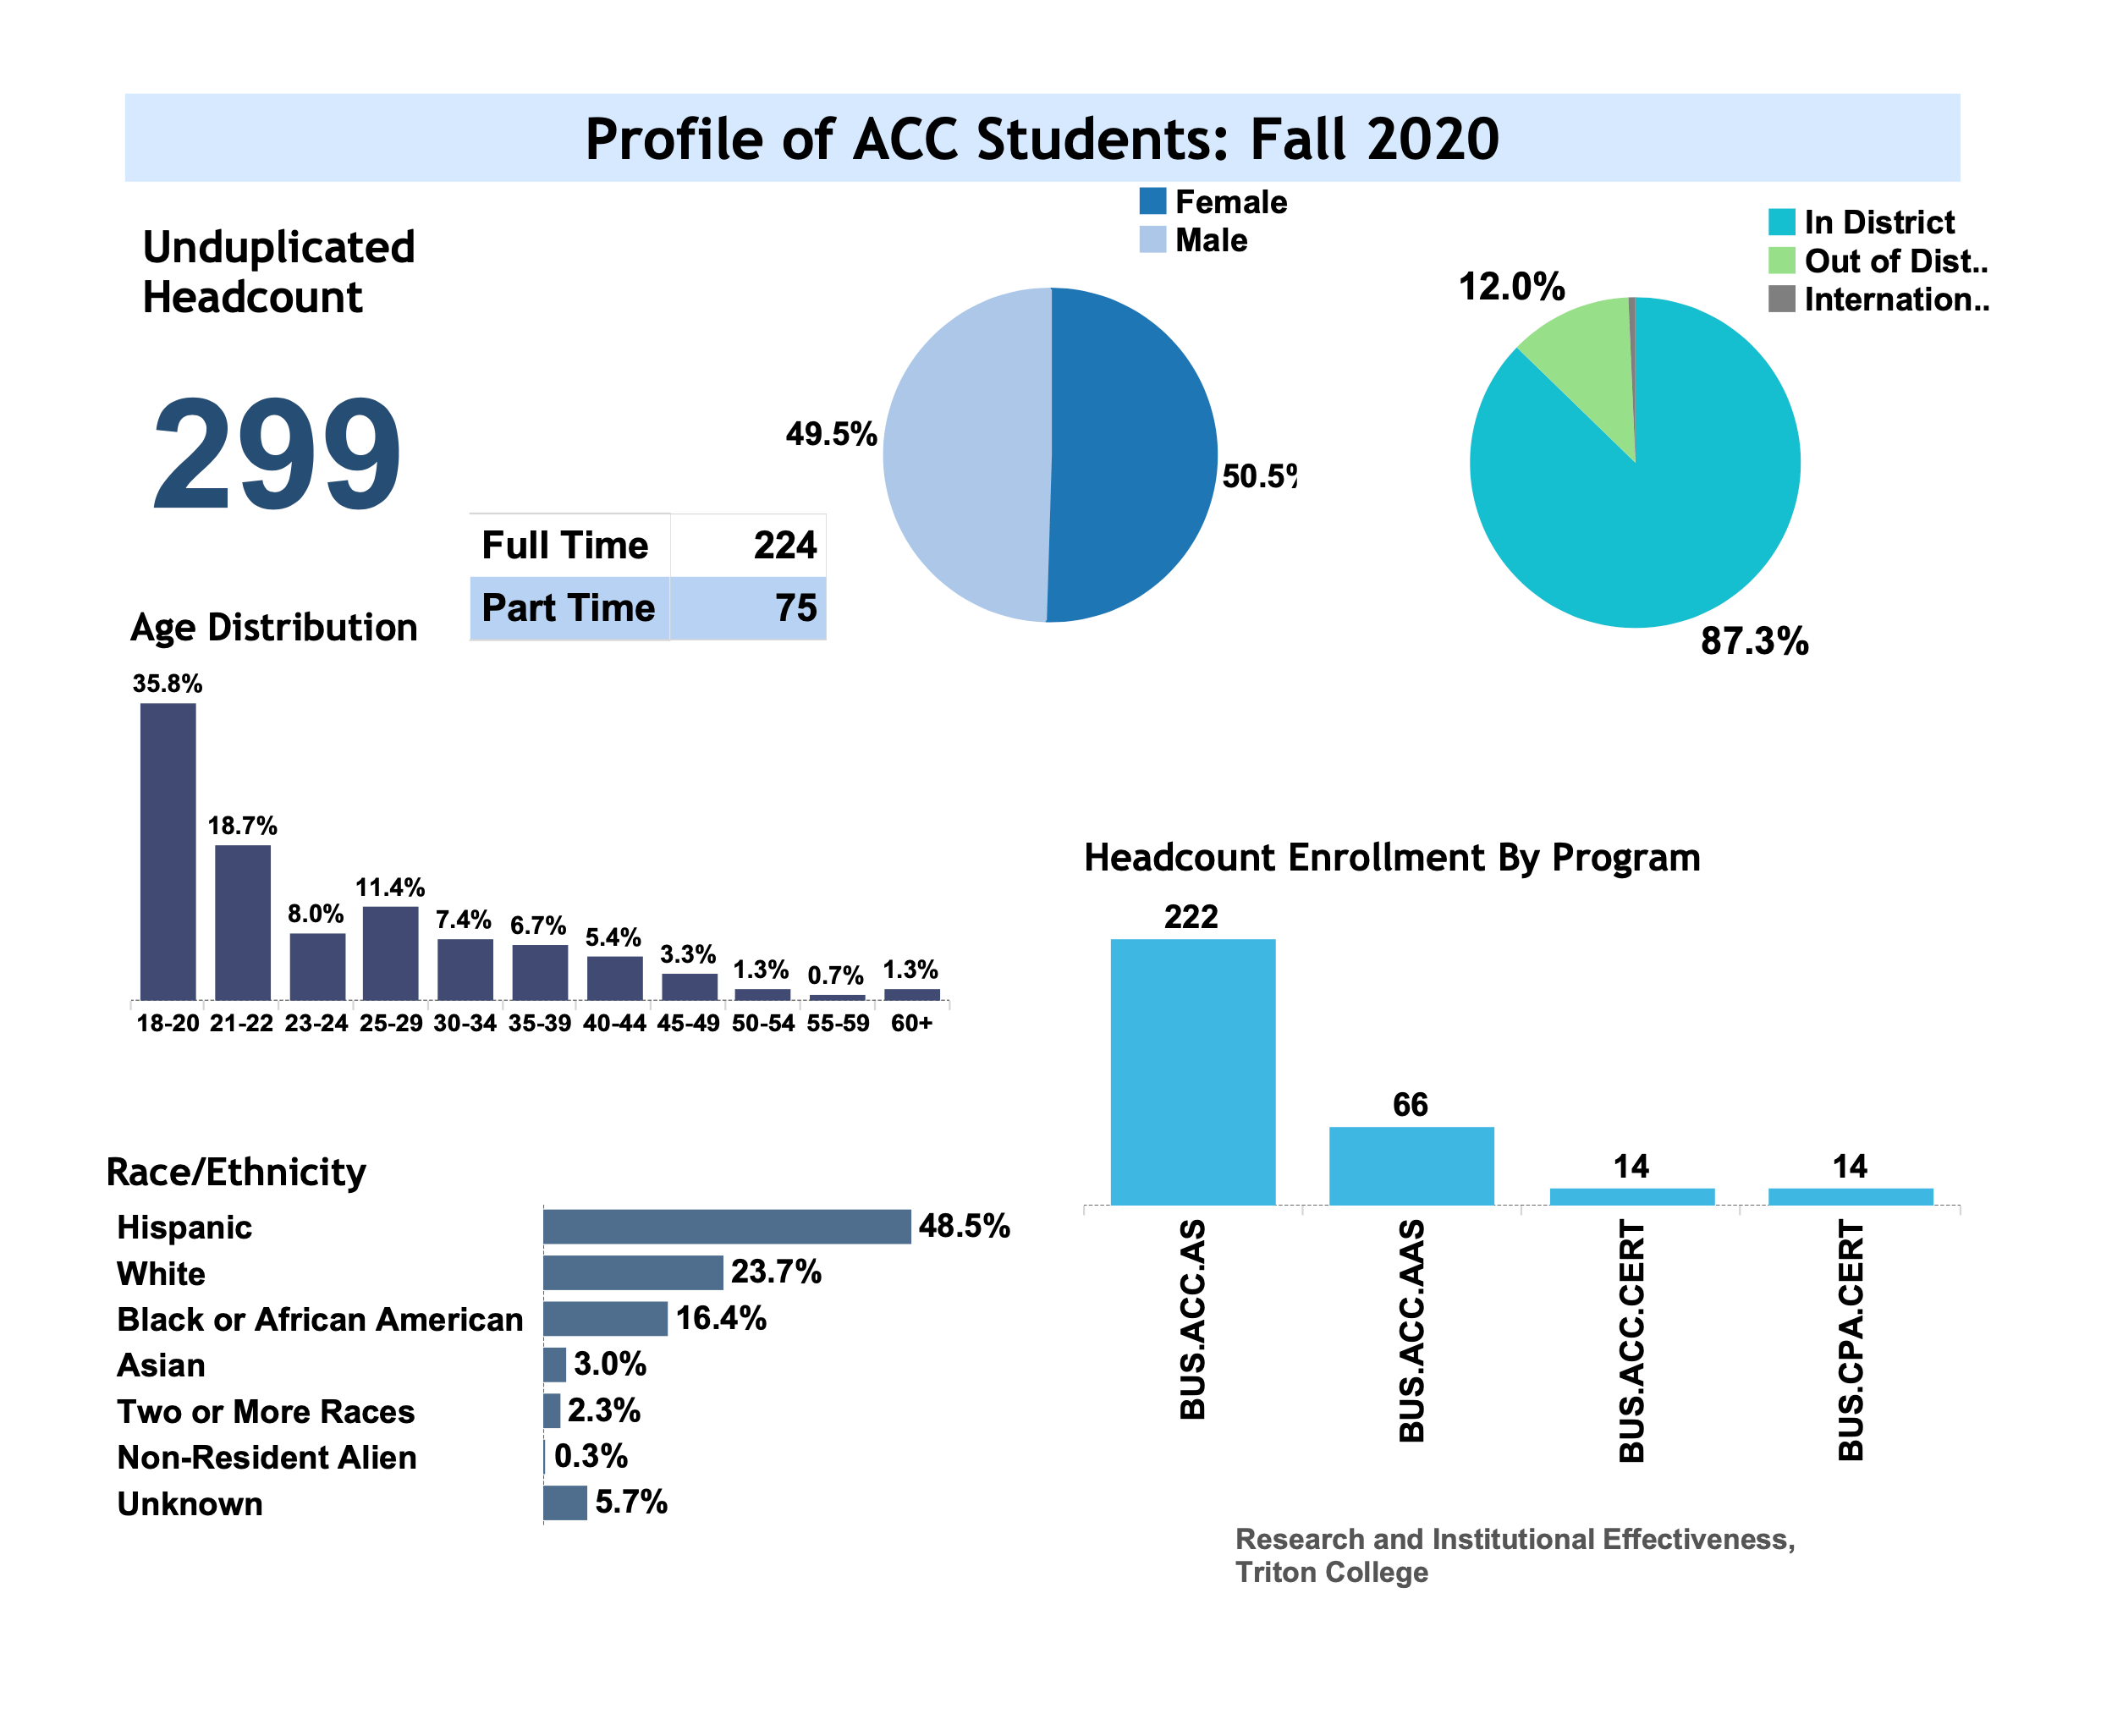 Profile of ACC Students